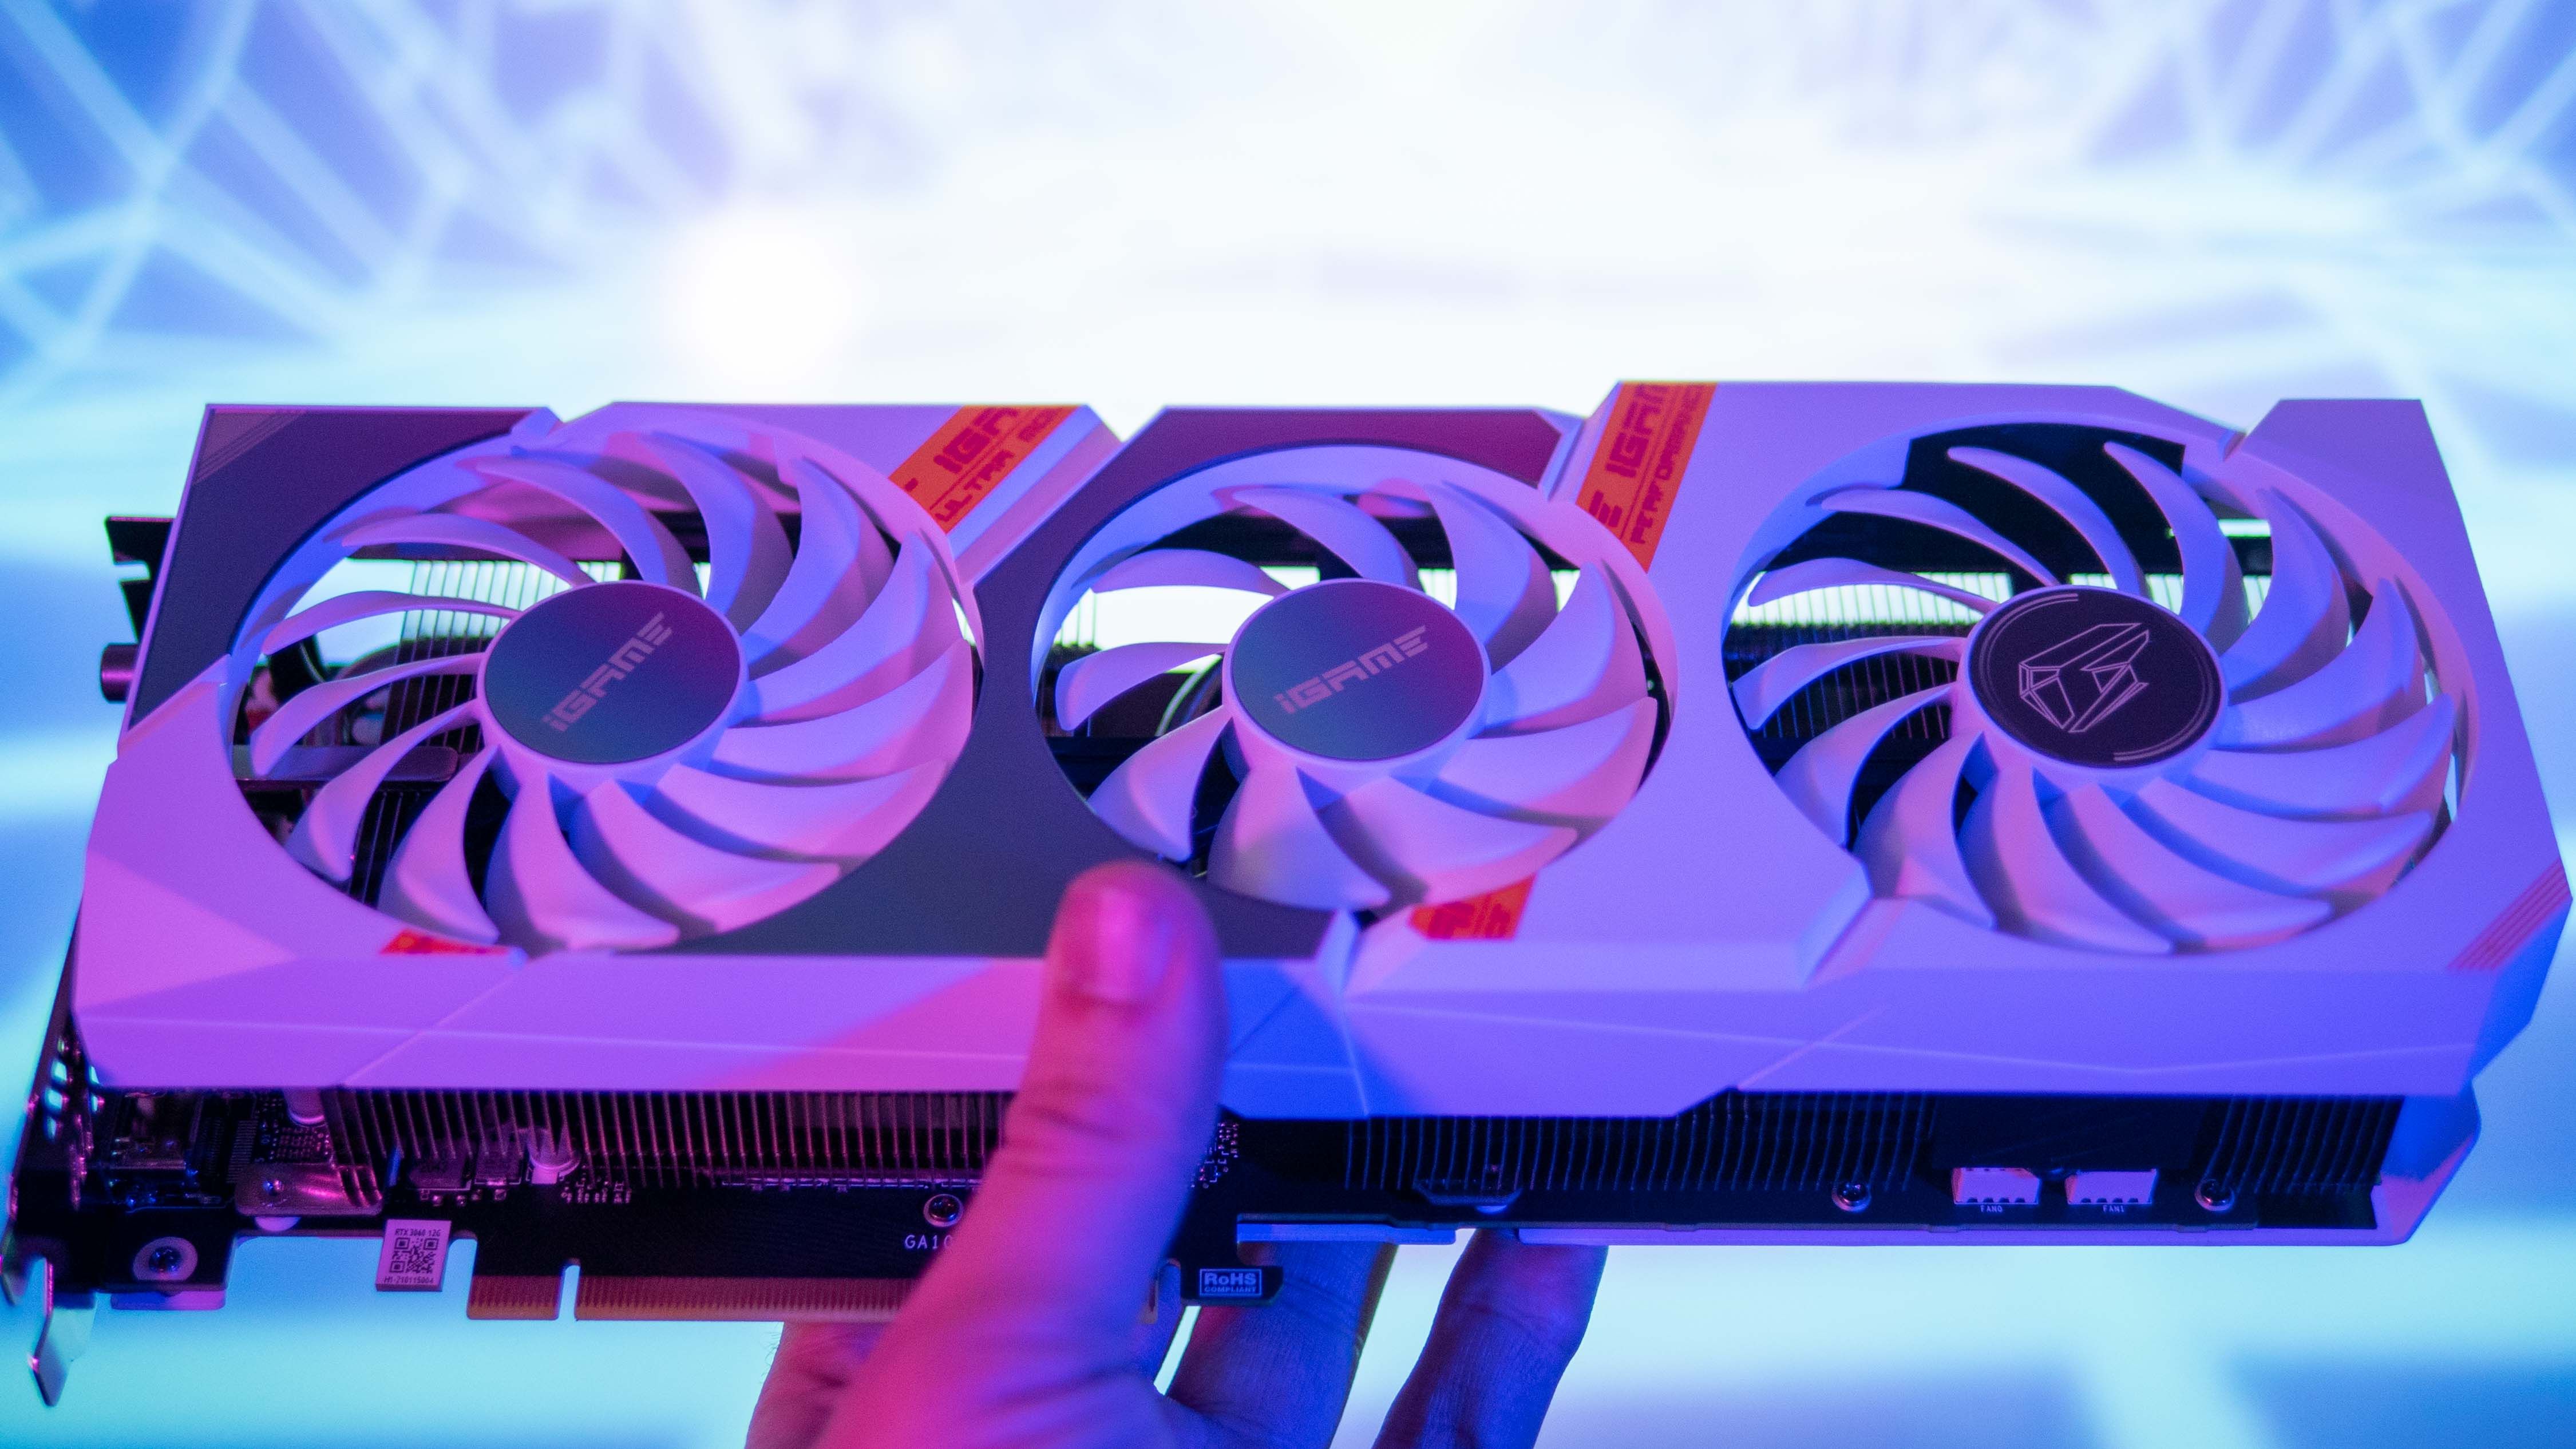 iGame RTX 3060 Ultra W OC Review: Next Gen Graphics at an 